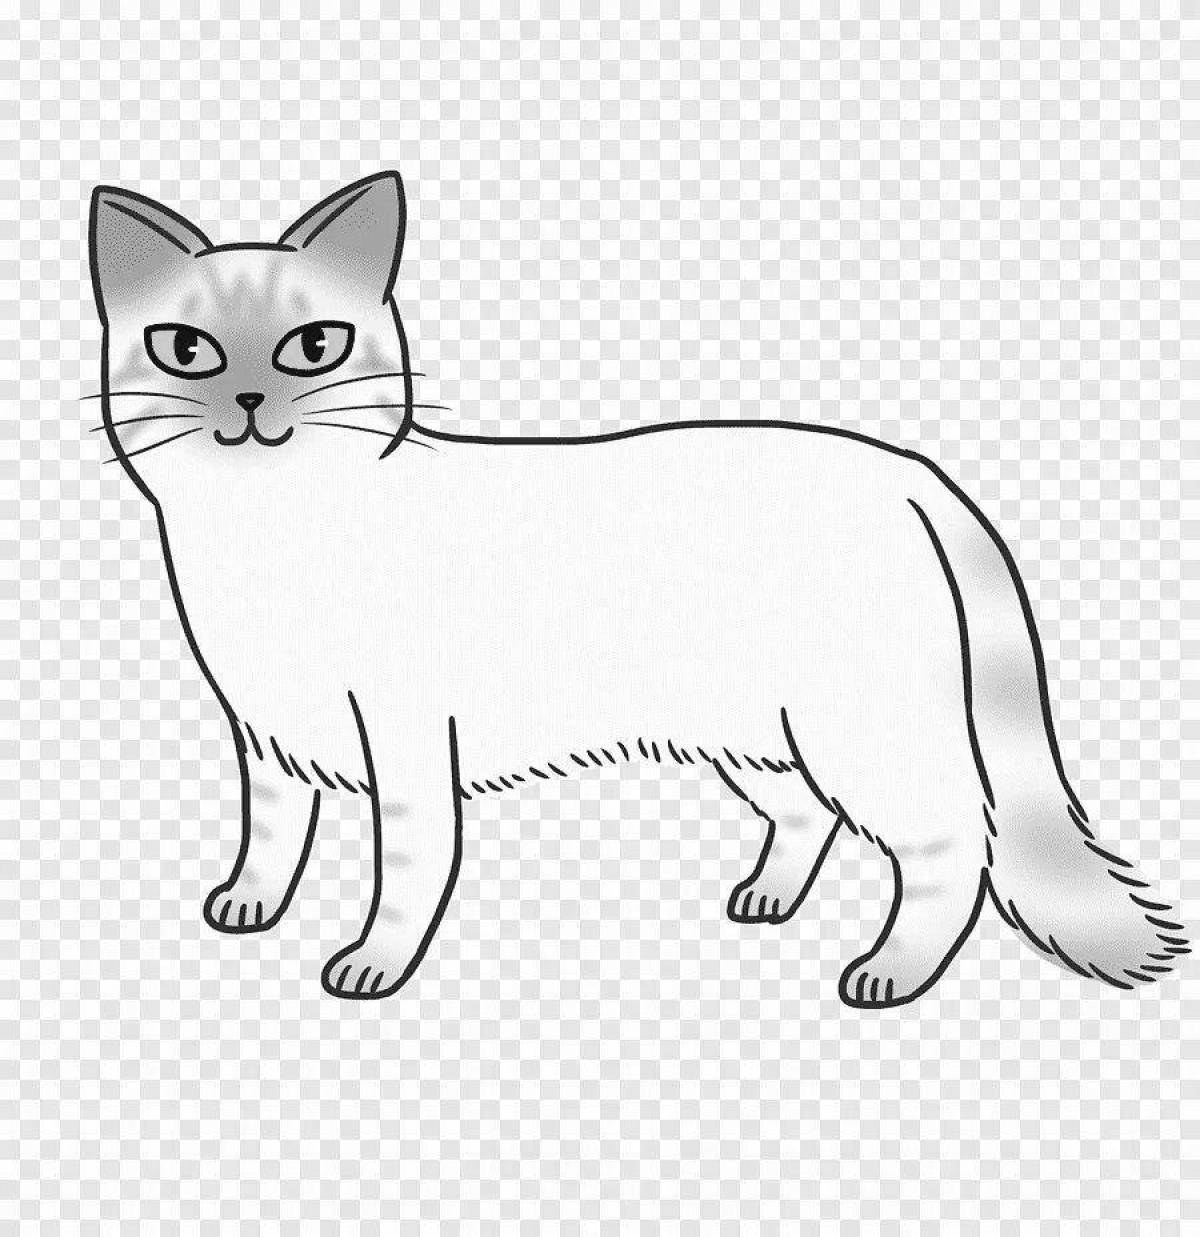 Coloring book playful Siamese cat